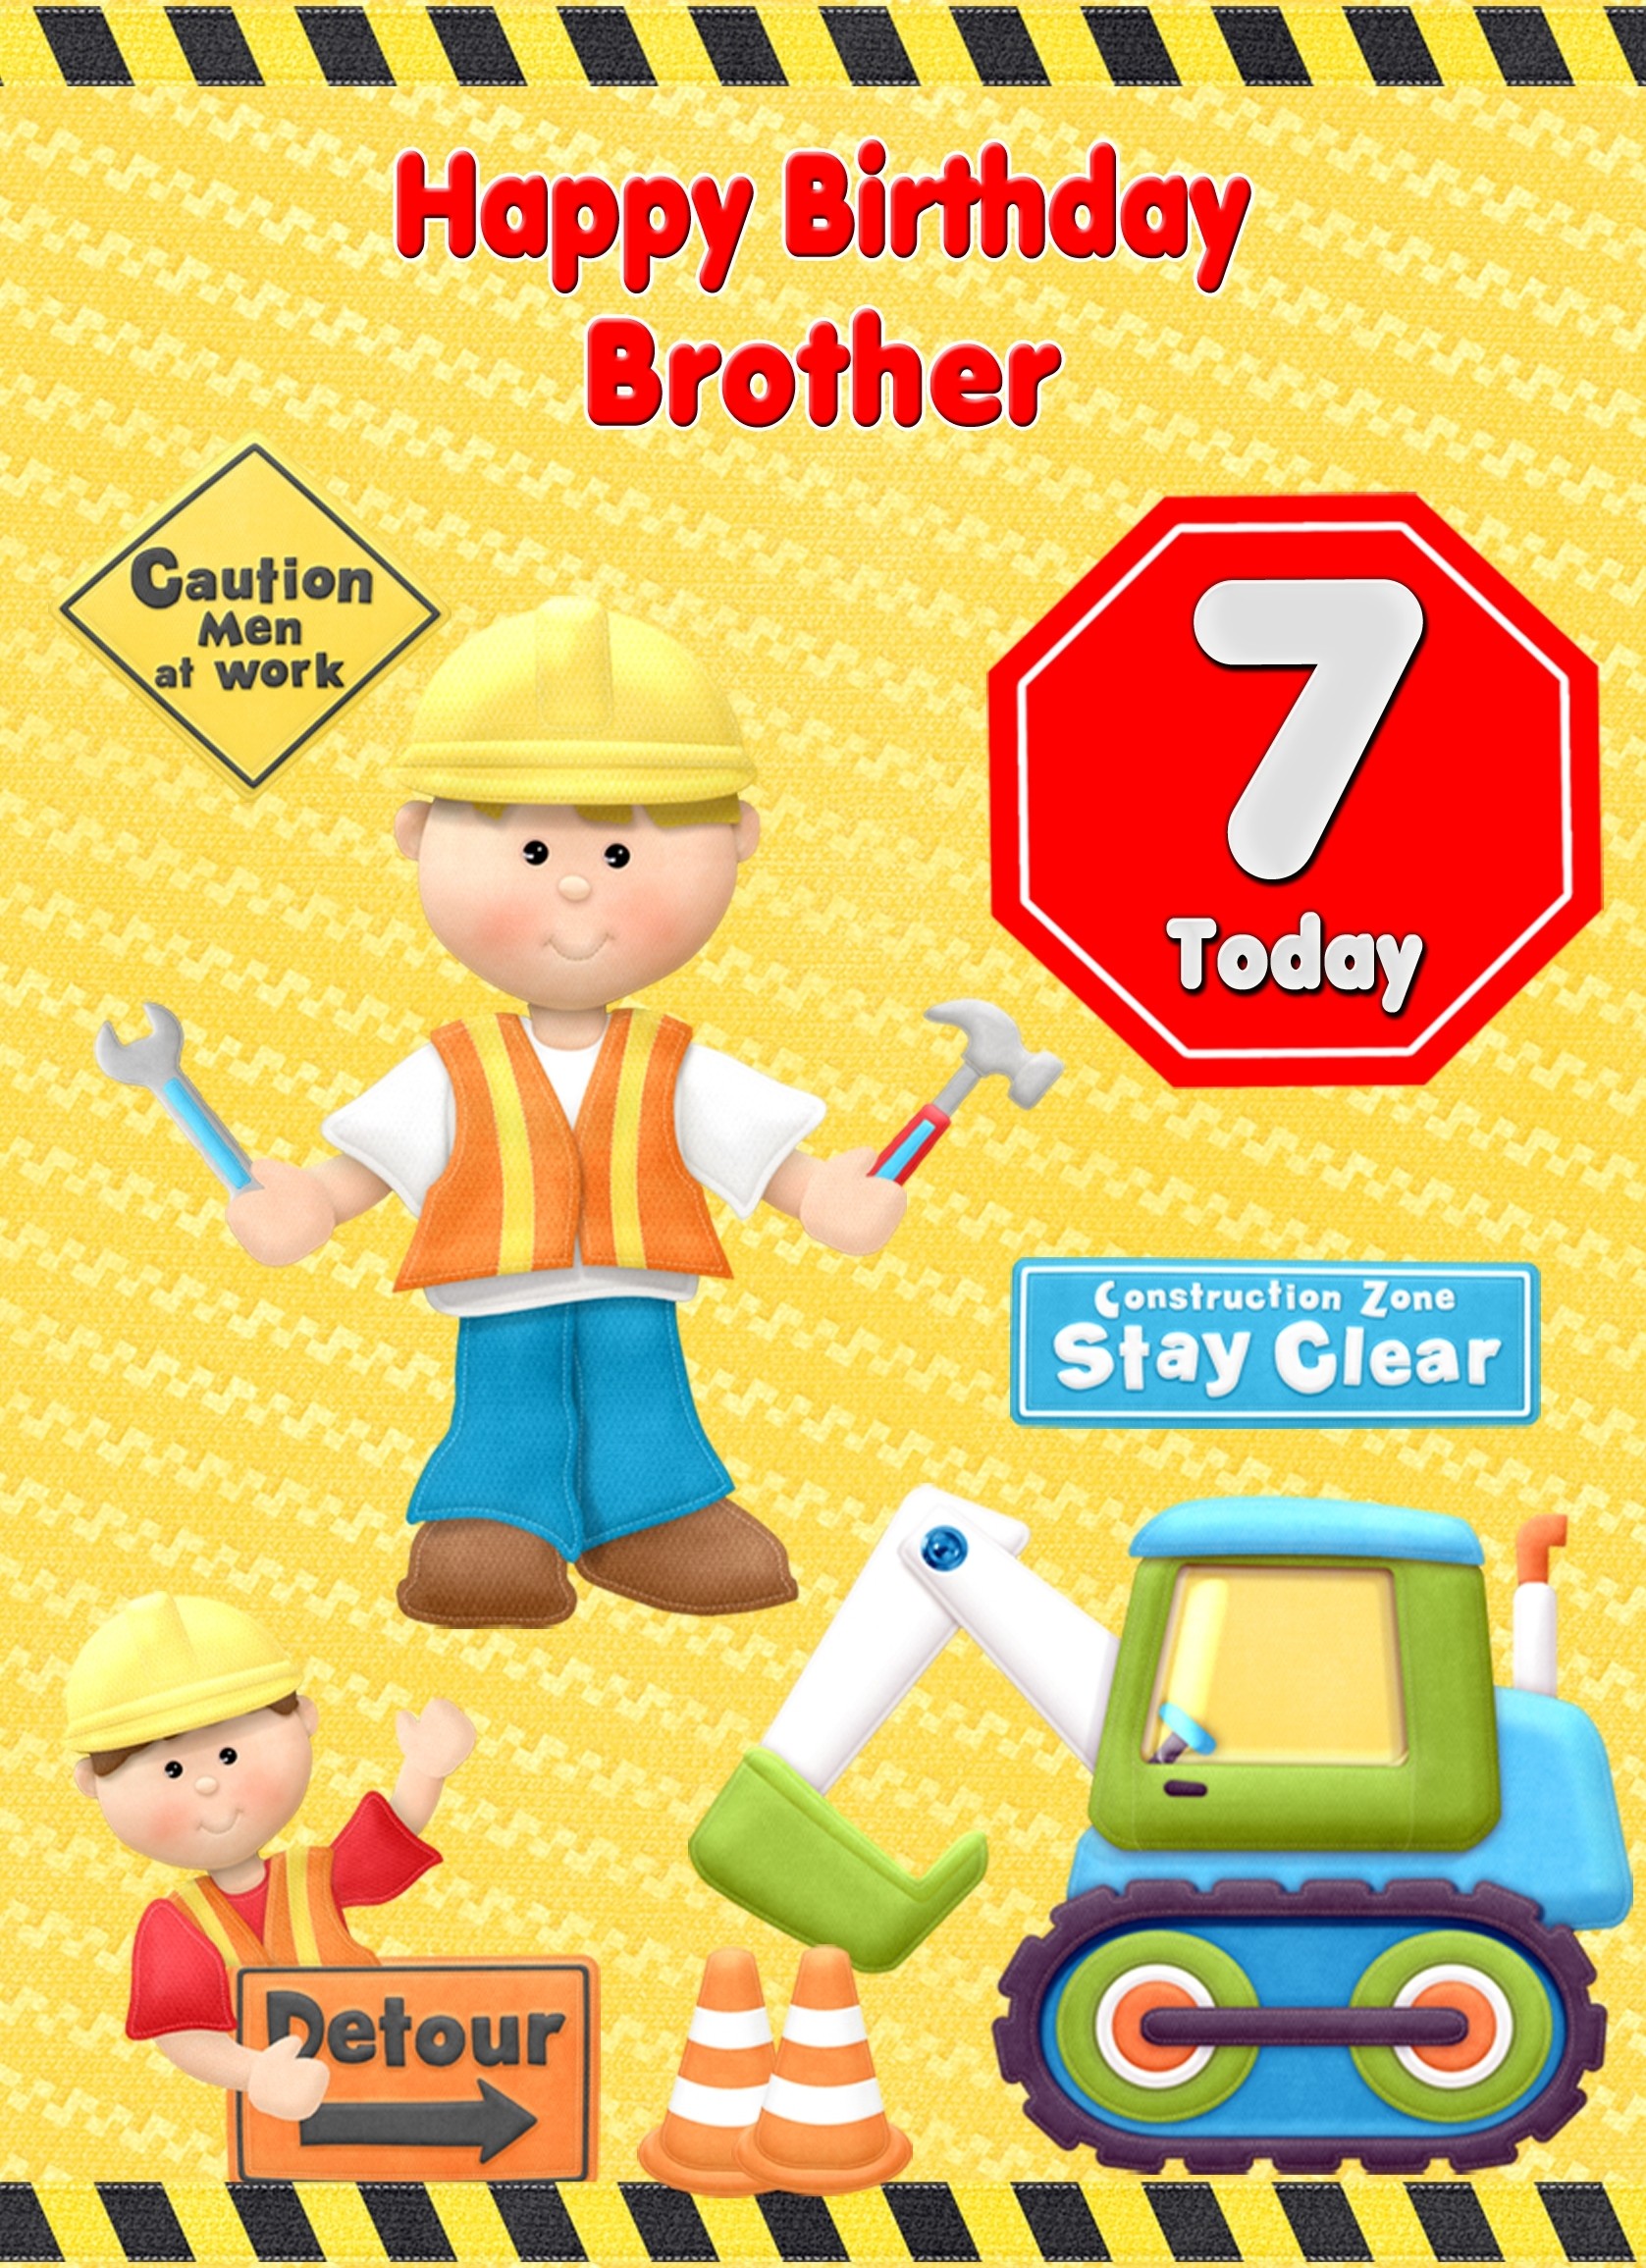 Kids 7th Birthday Builder Cartoon Card for Brother